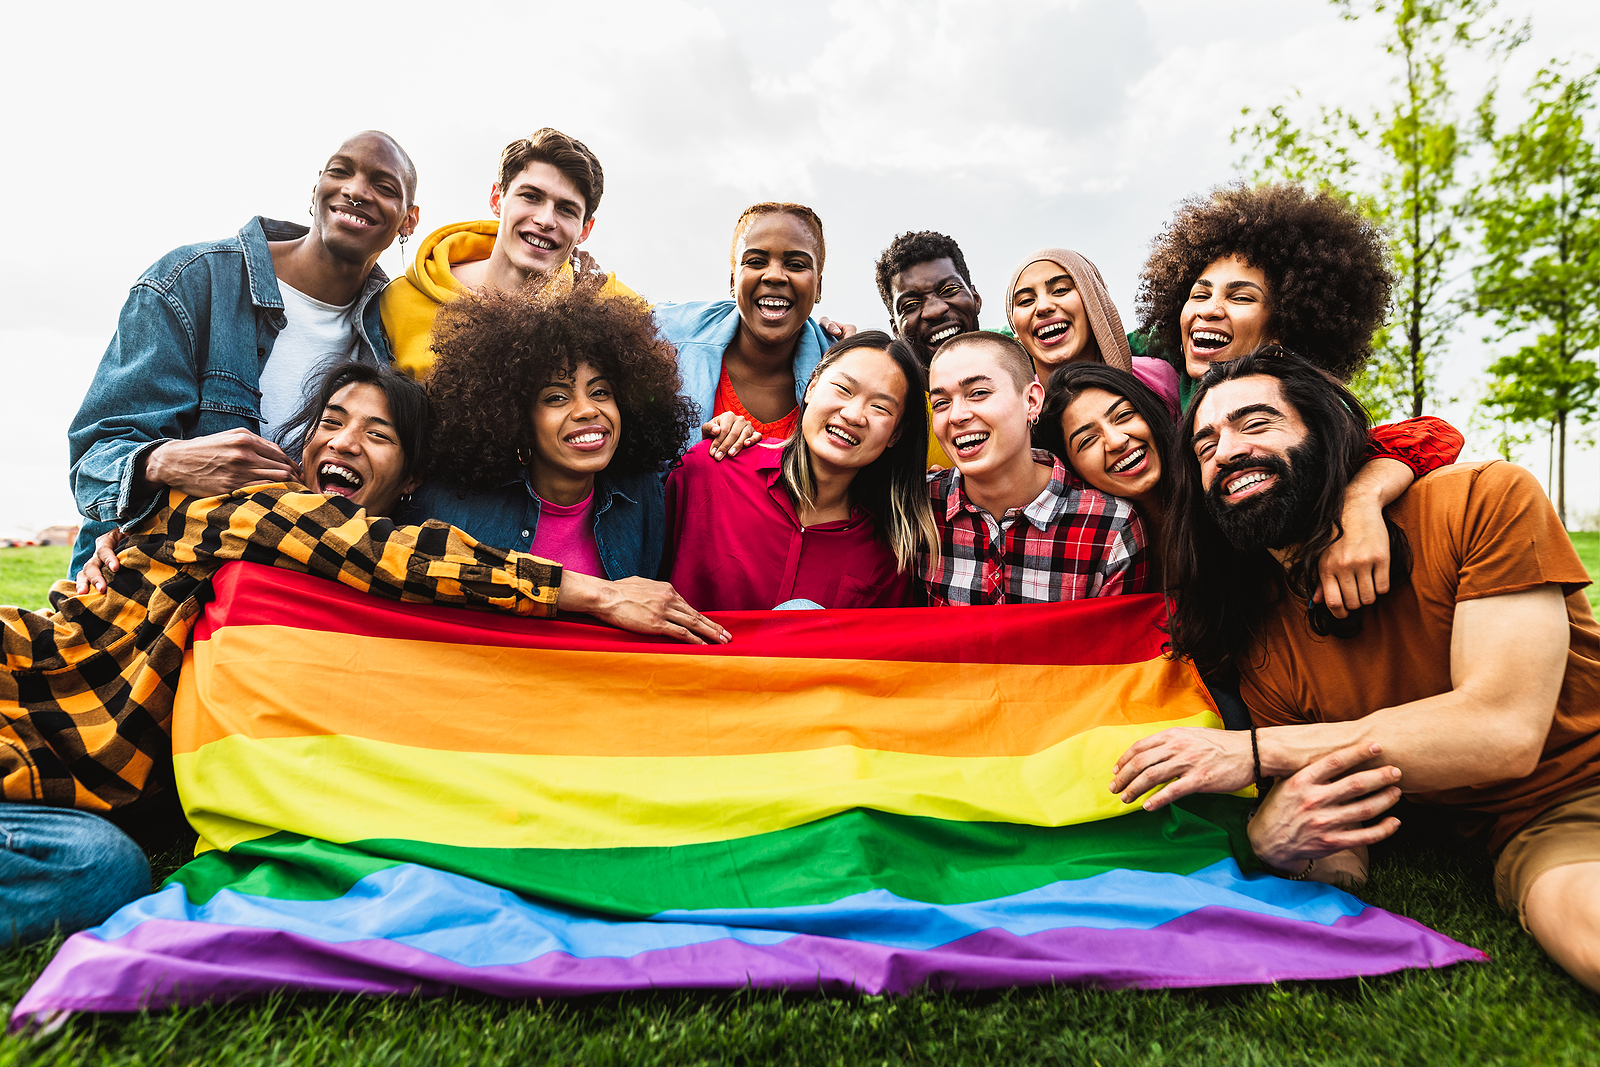 A large group of friends all smile and embrace eachother as they sit on the grass together holding a rainbow flag.